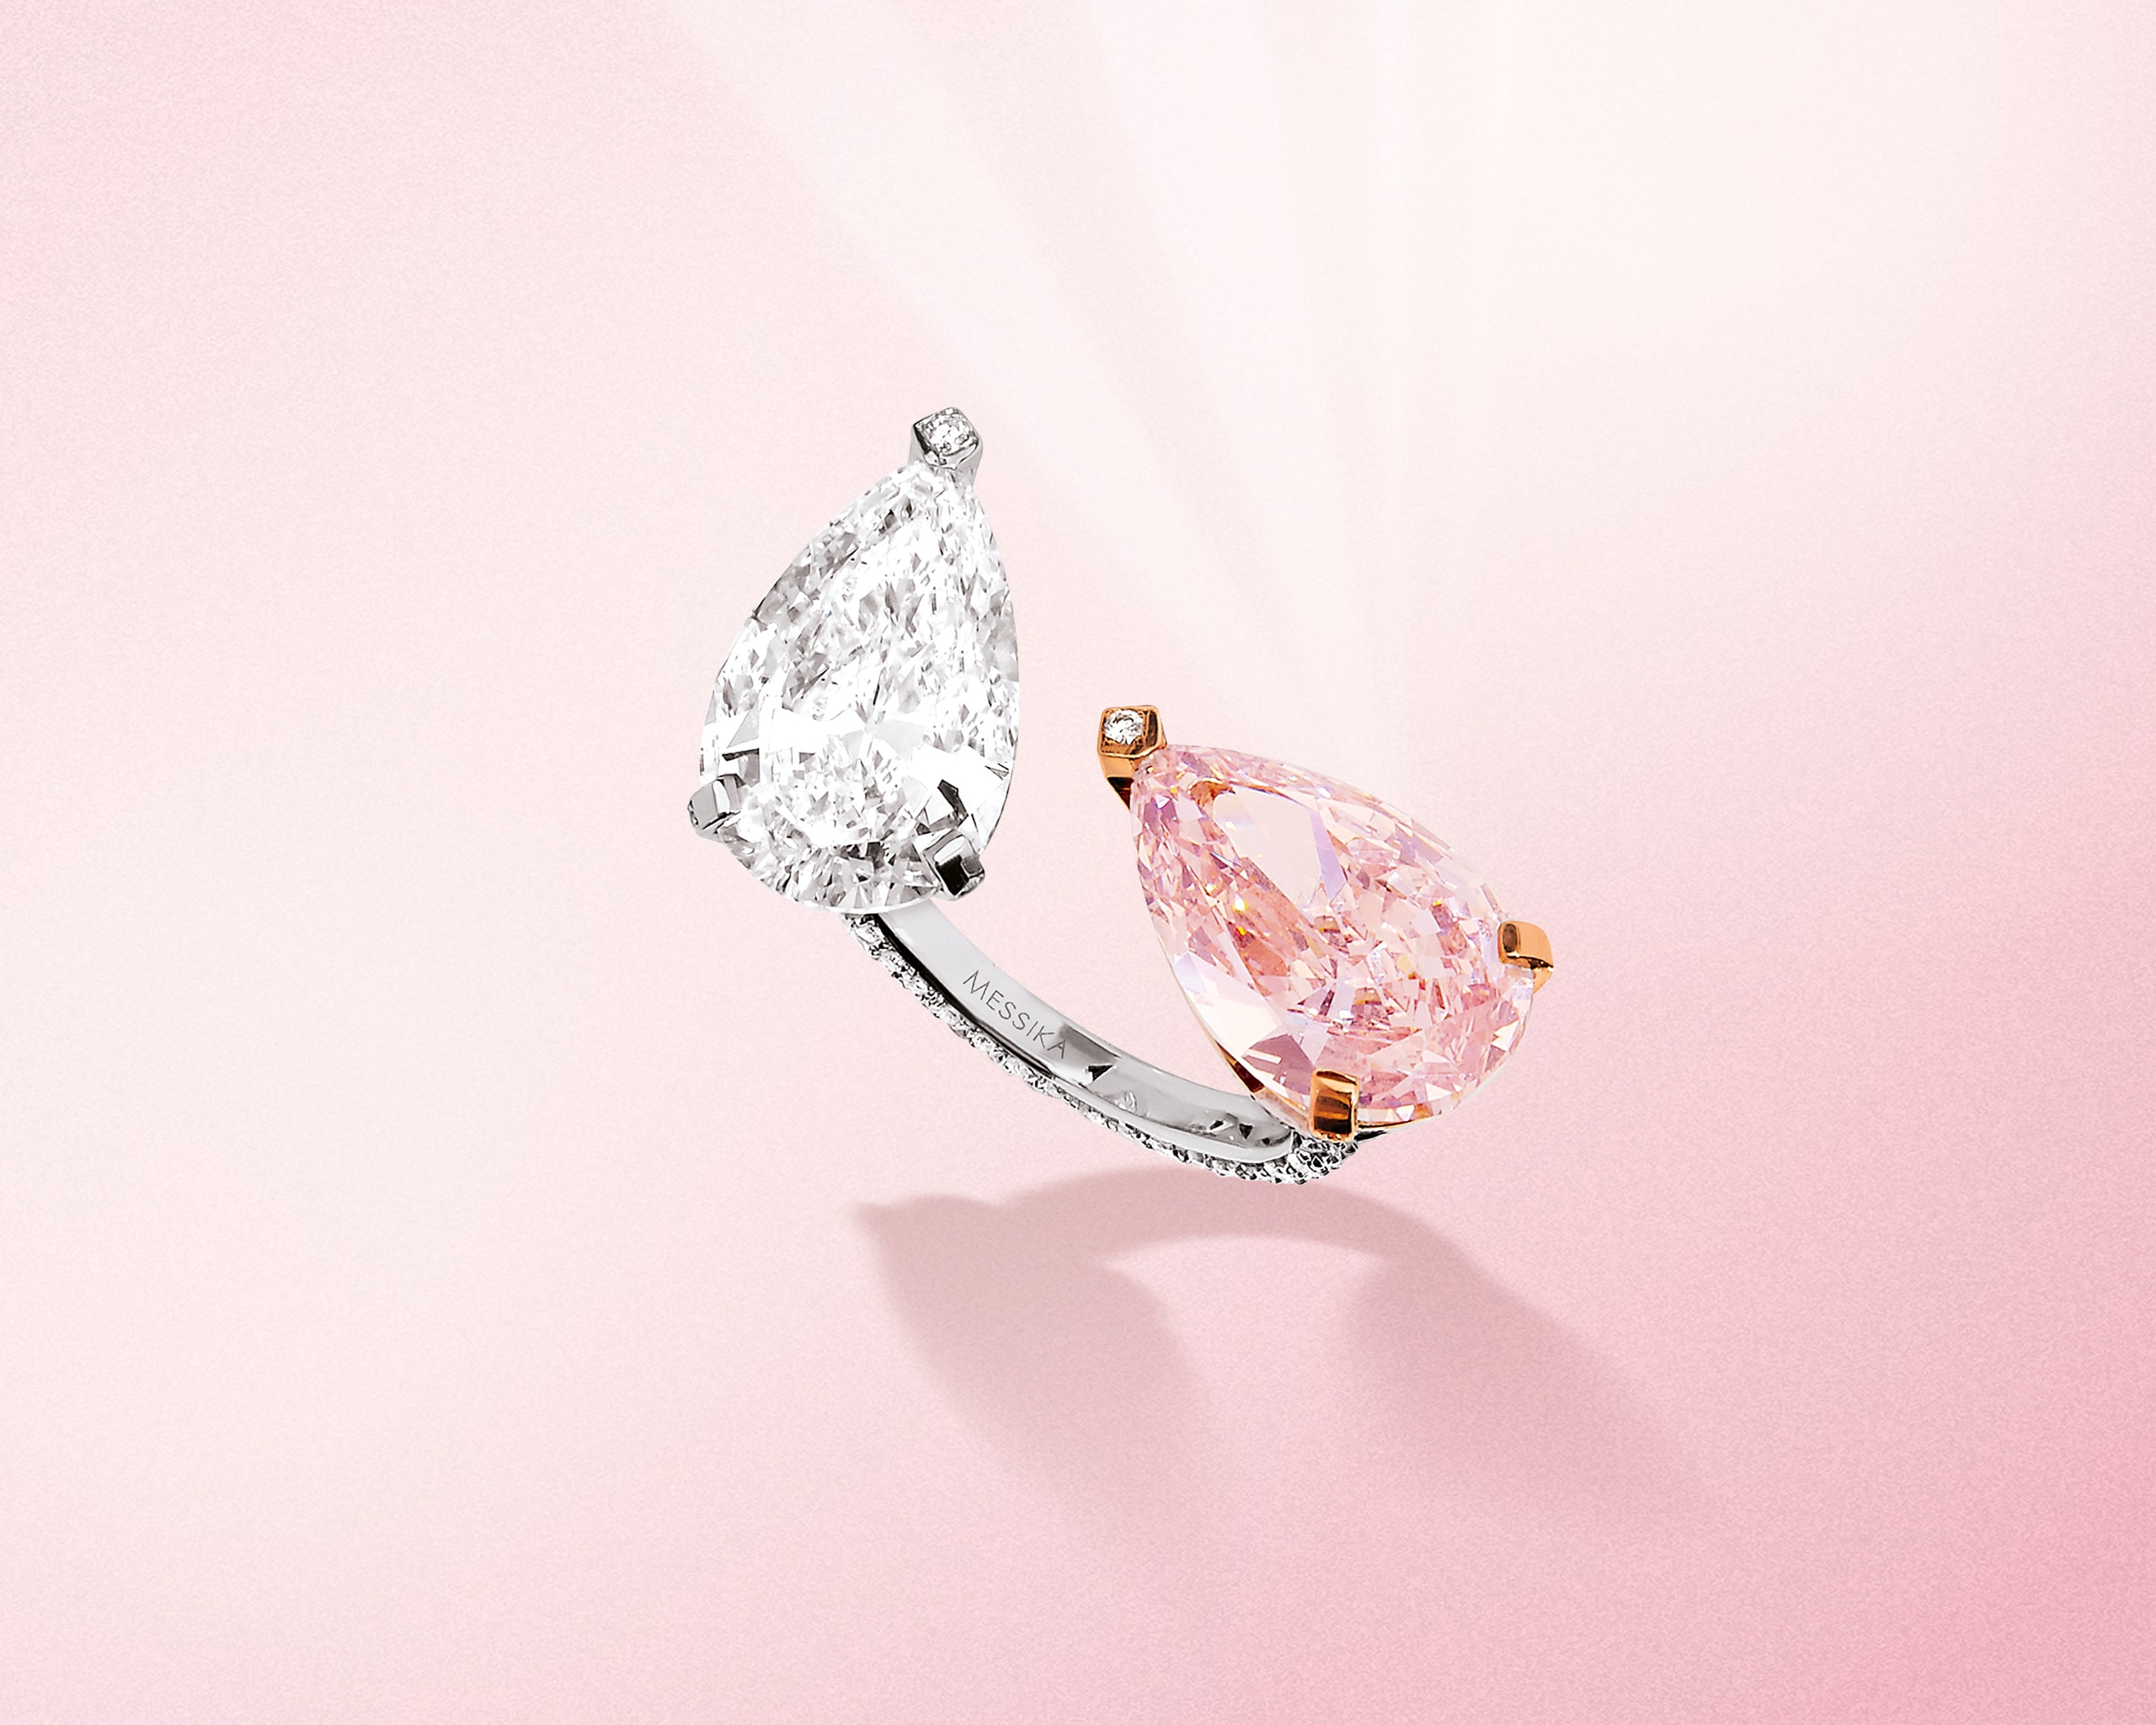 Pear shaped in a toi et moi setting on a platinum band from Messika